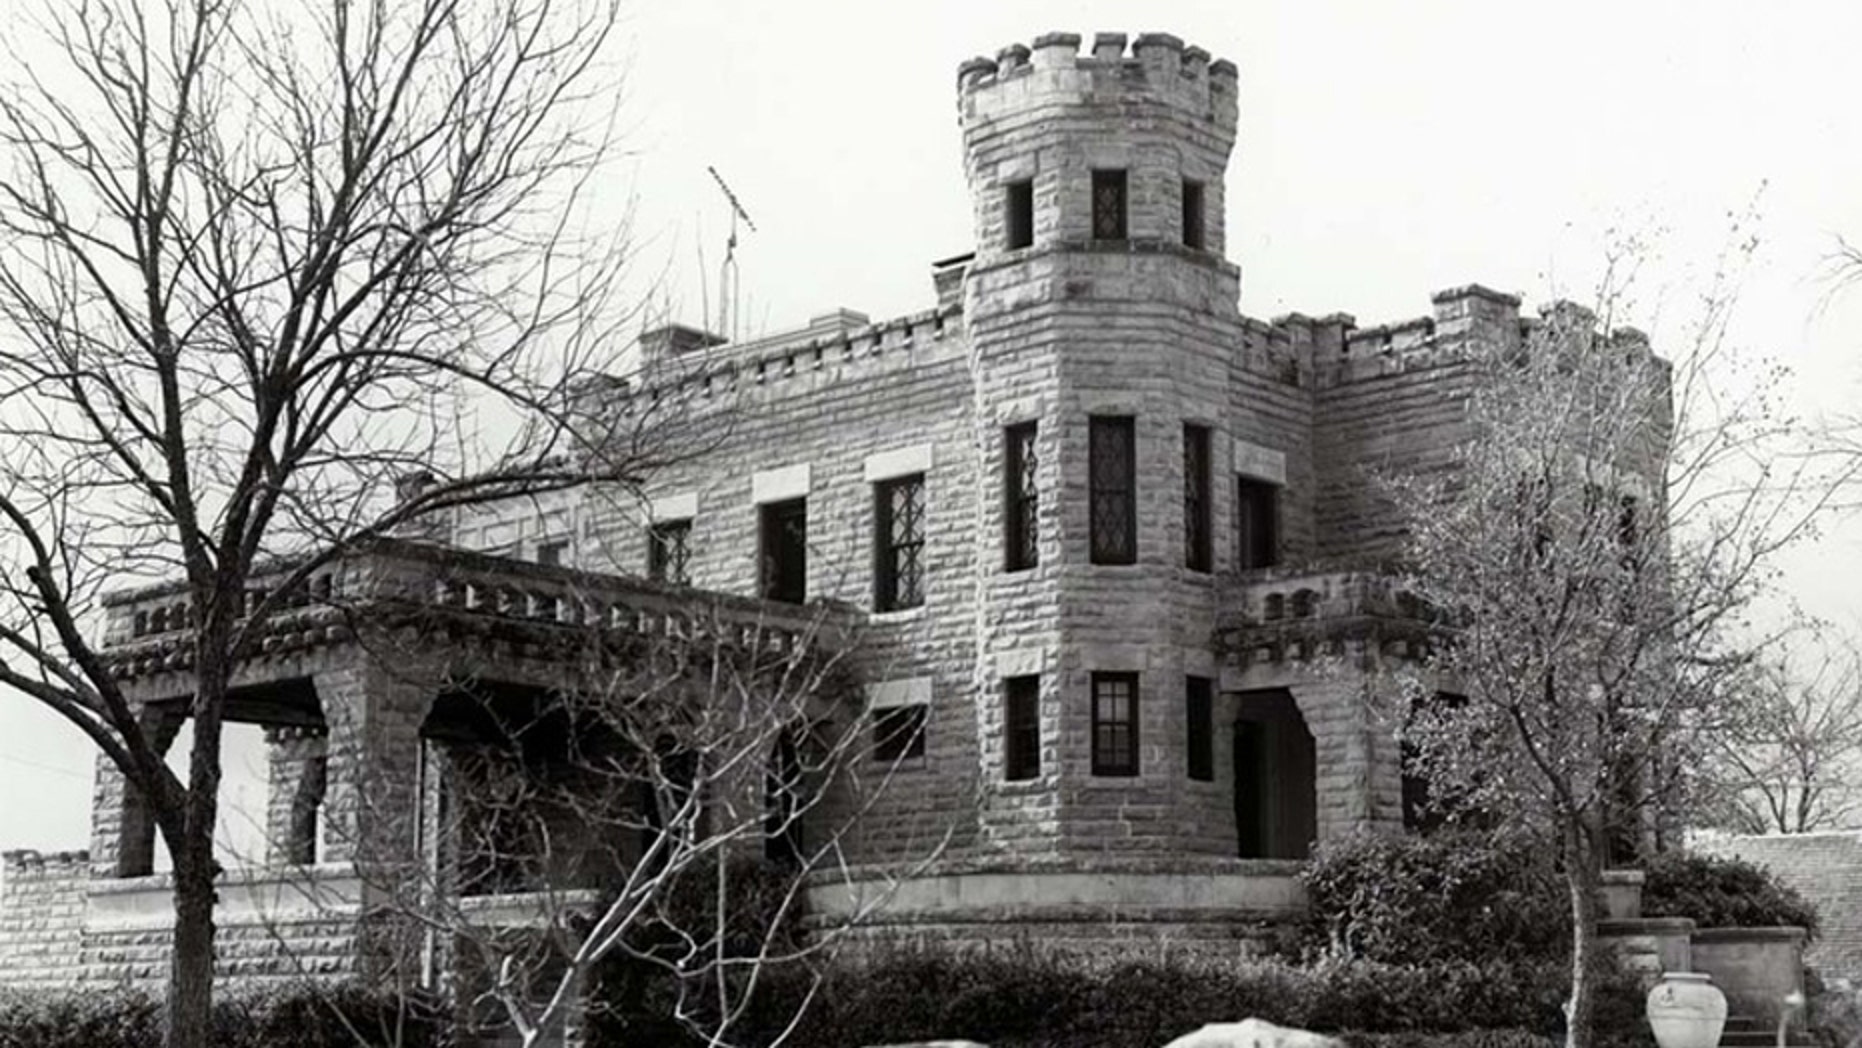 Construction on the 6,700-square-foot stone castle began in 1890 and was completed in 1913.